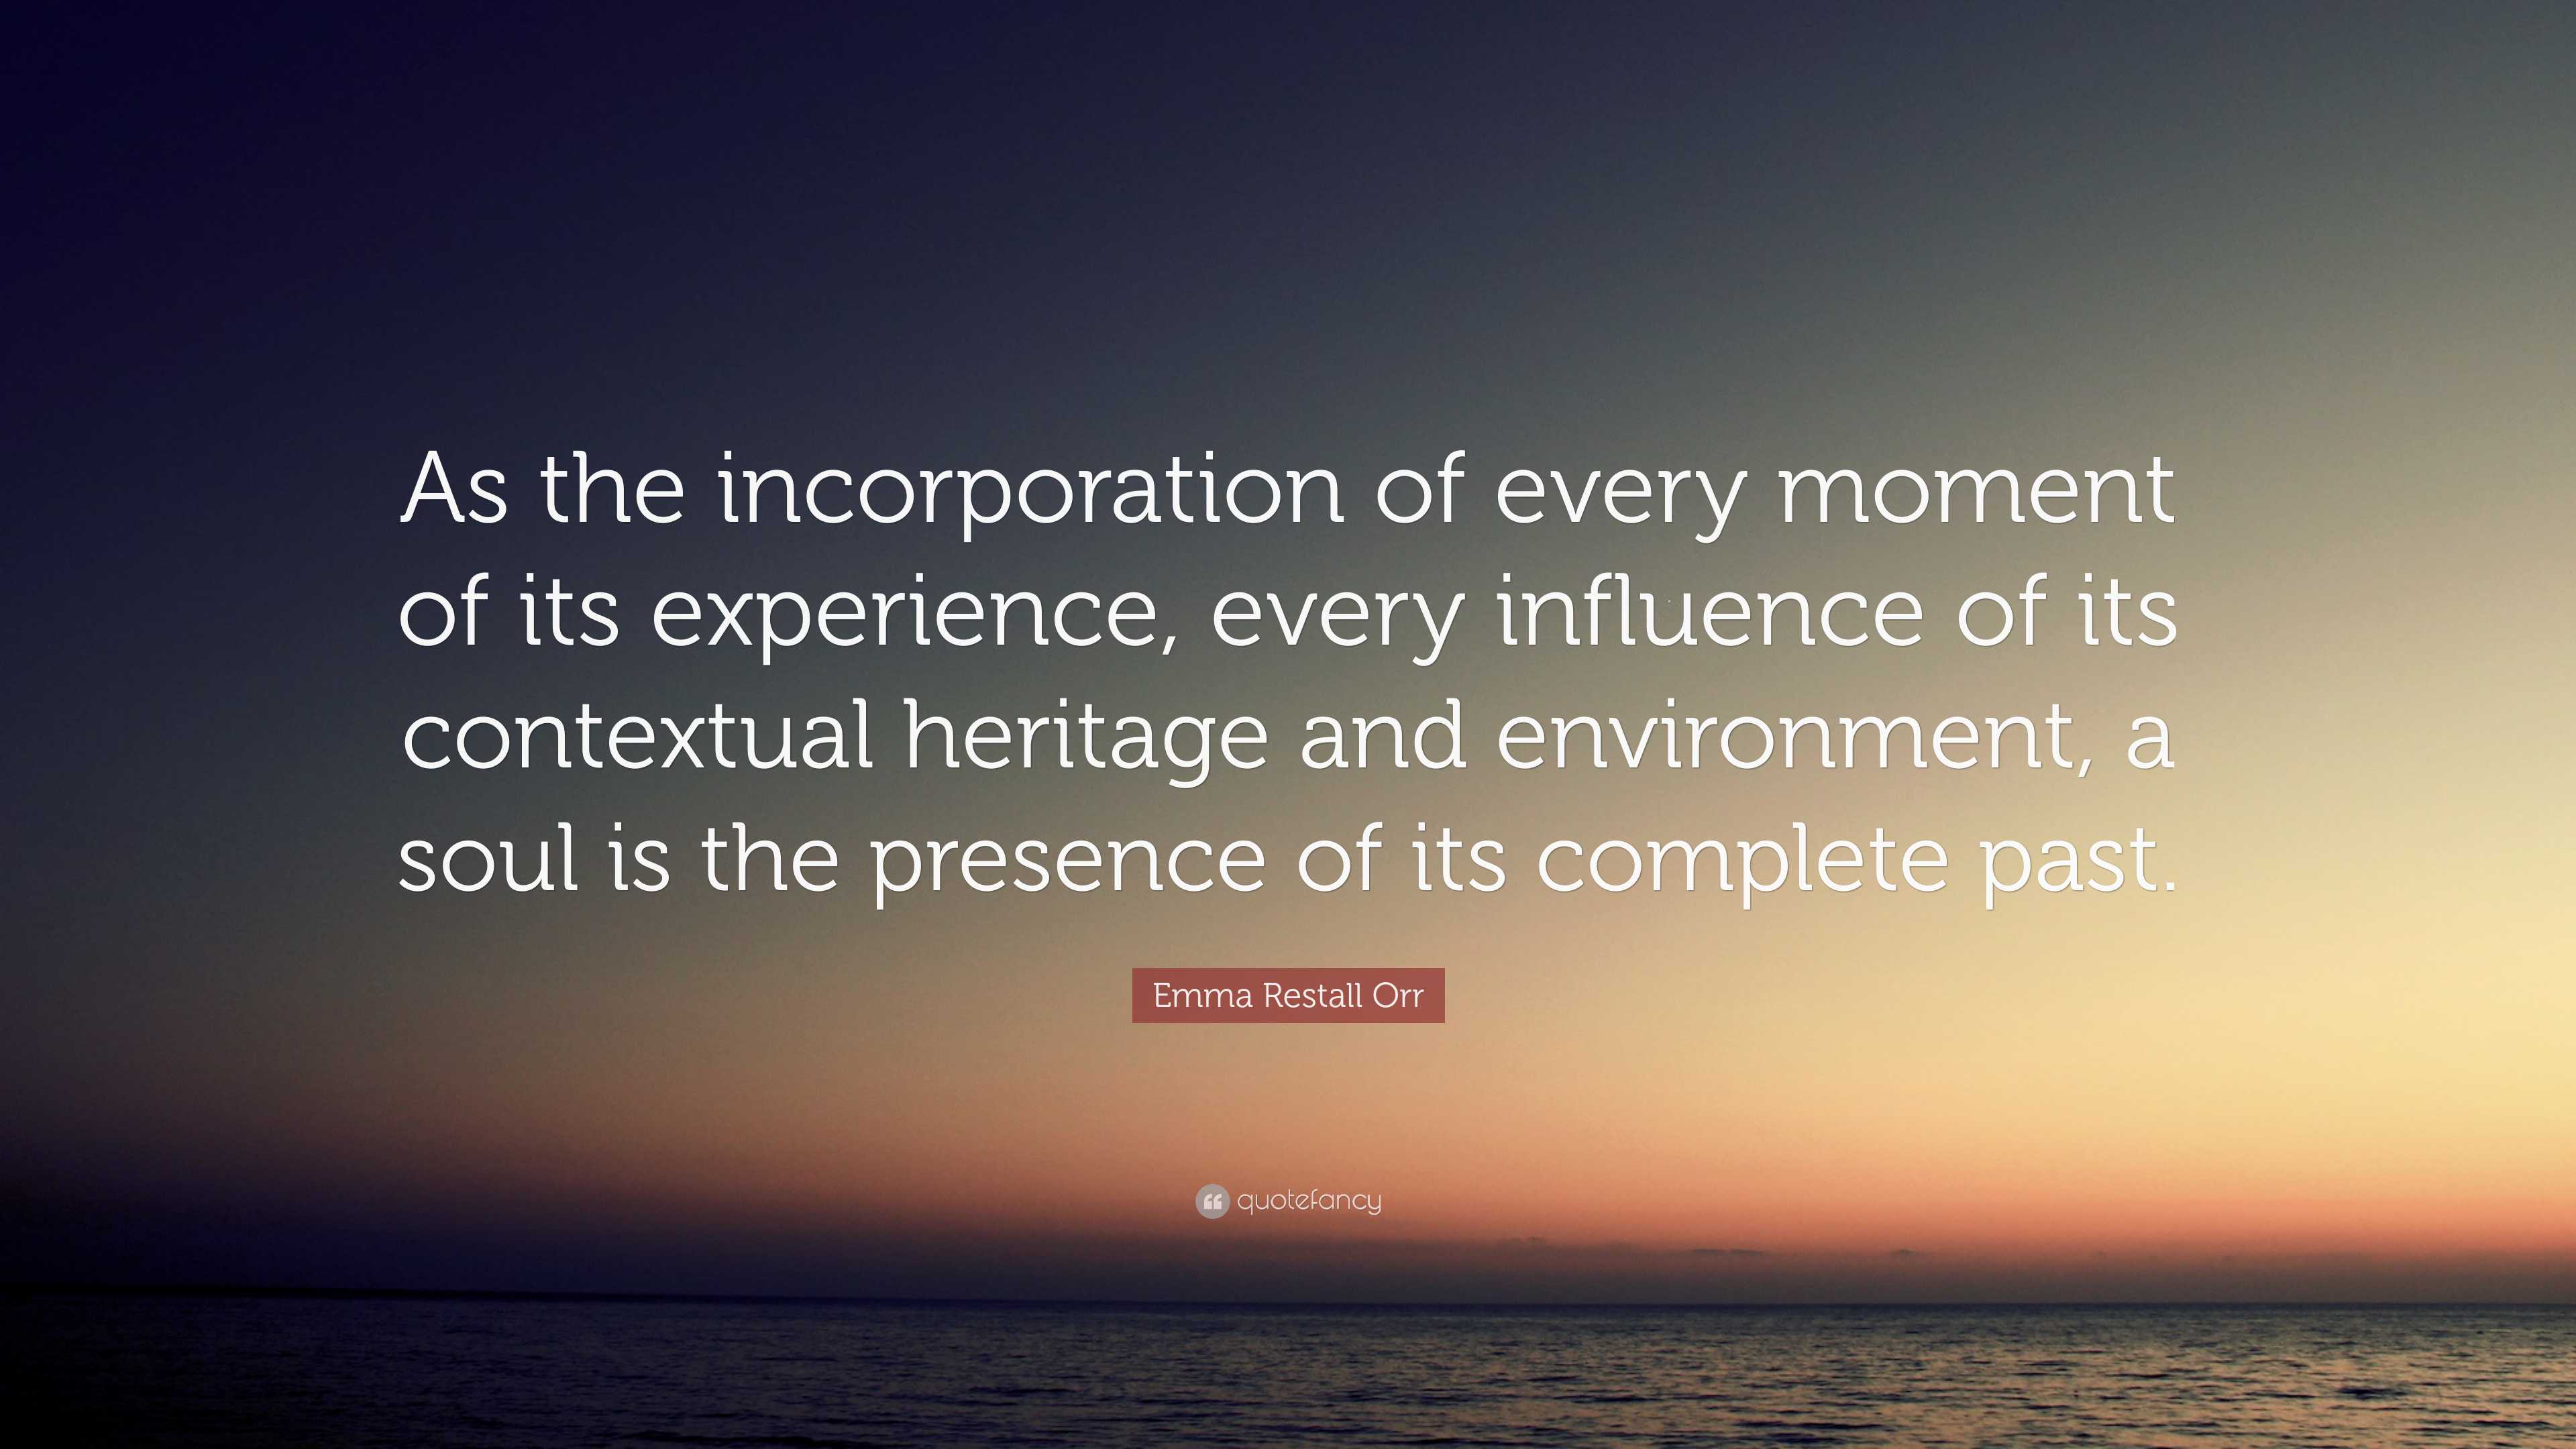 Emma Restall Orr Quote: “As the incorporation of every moment of its ...